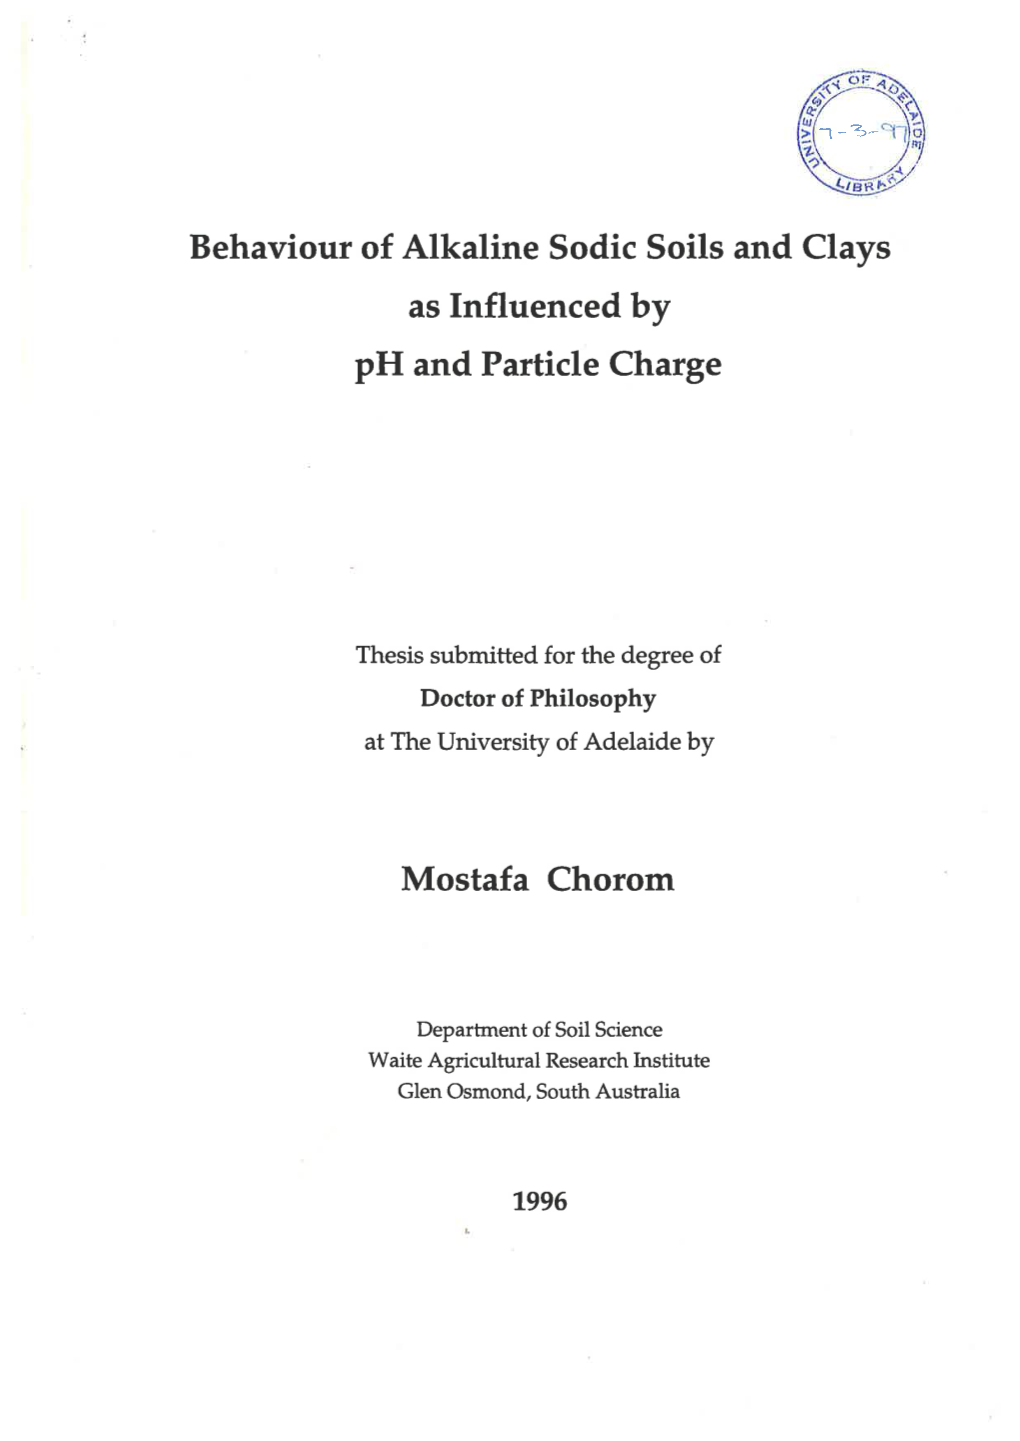 Behaviour of Alkaline Sodic Soils and Clays As Influenced by Ph and Particle Charge